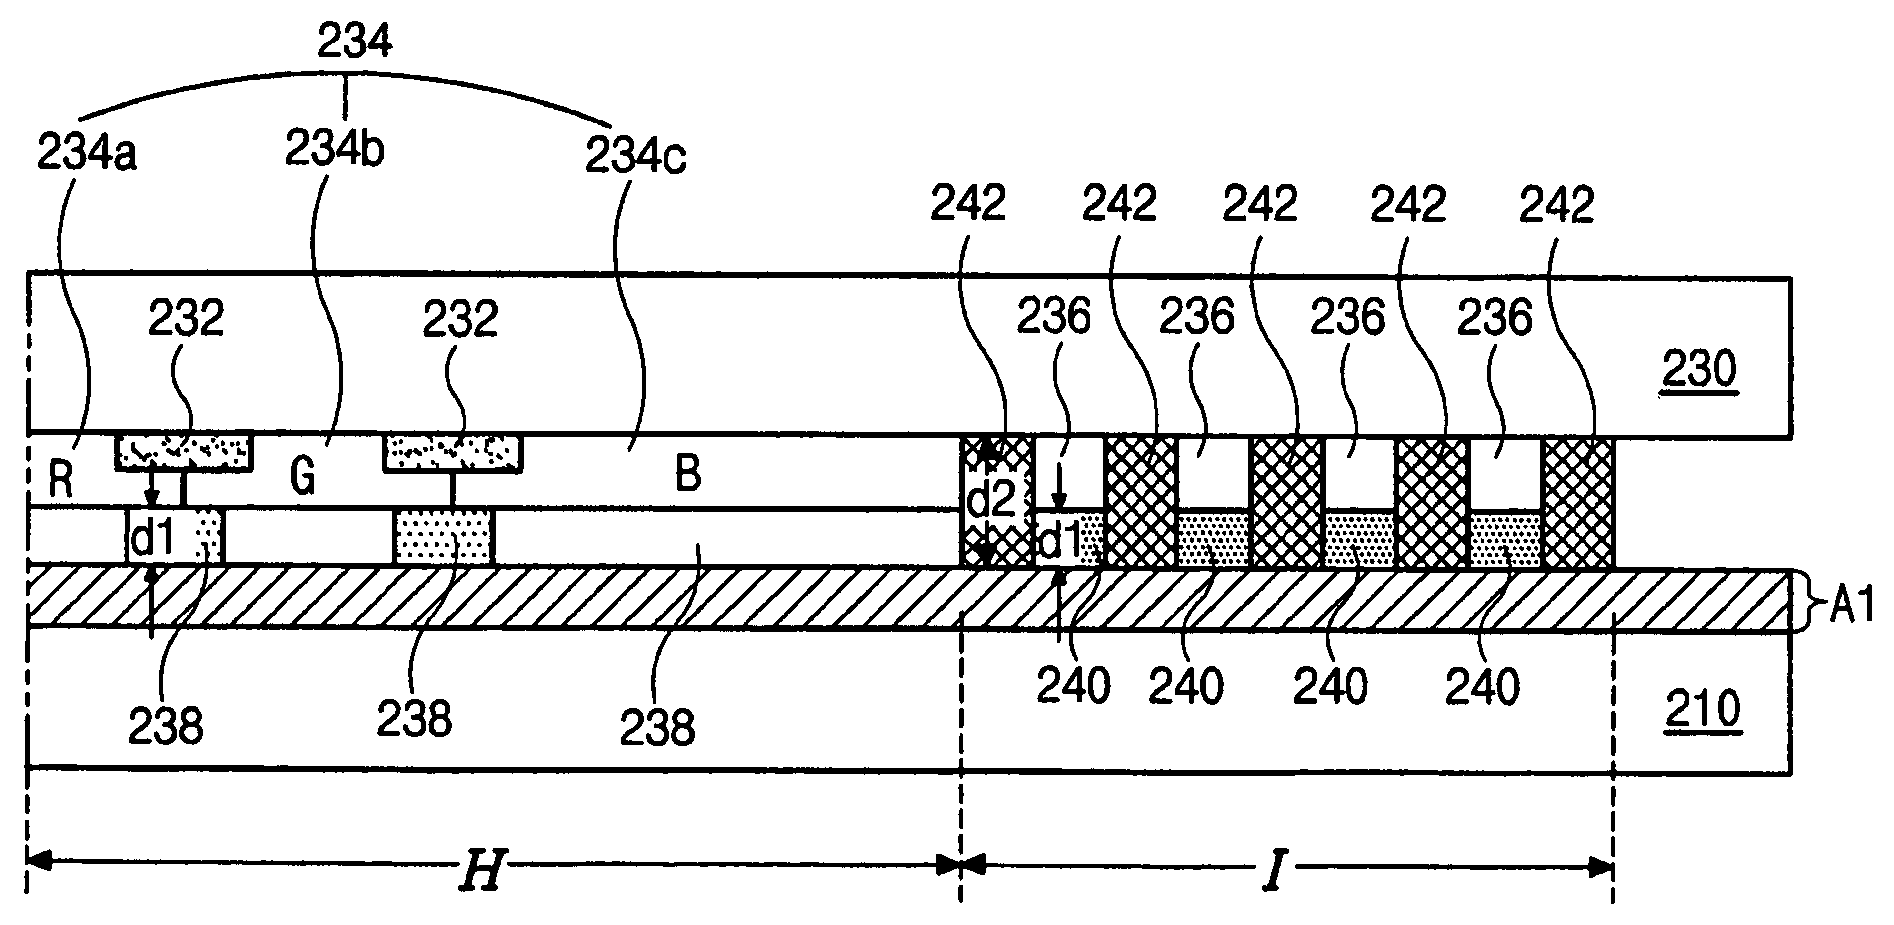 Liquid crystal display device and method of manufacturing the same comprising a plurality of seal patterns between a plurality of supporting patterns and a plurality of compensating patterns disposed below and aligned with the plurality of supporting patterns